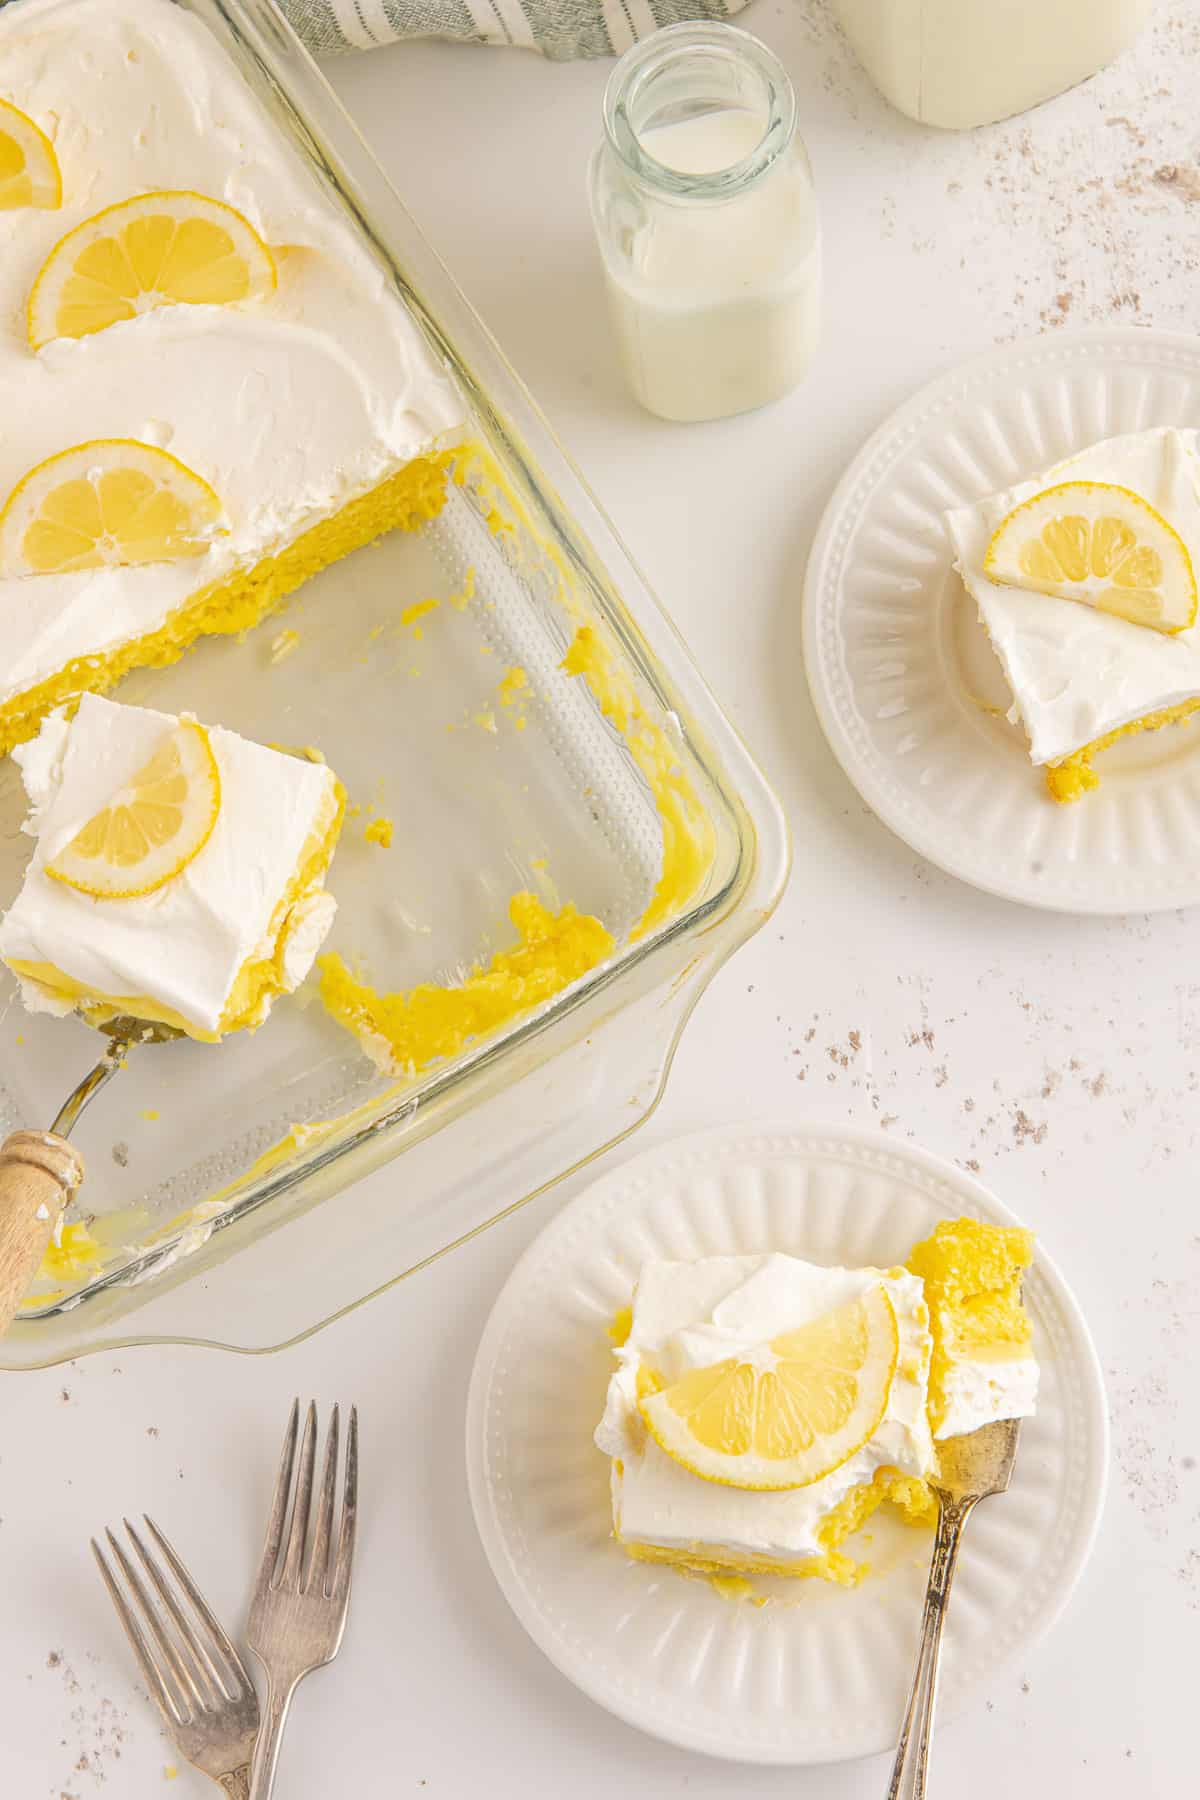 Overhead of multiple servings of lemon poke cake on plates and in the baking dish with forks, milk and a towel around them.